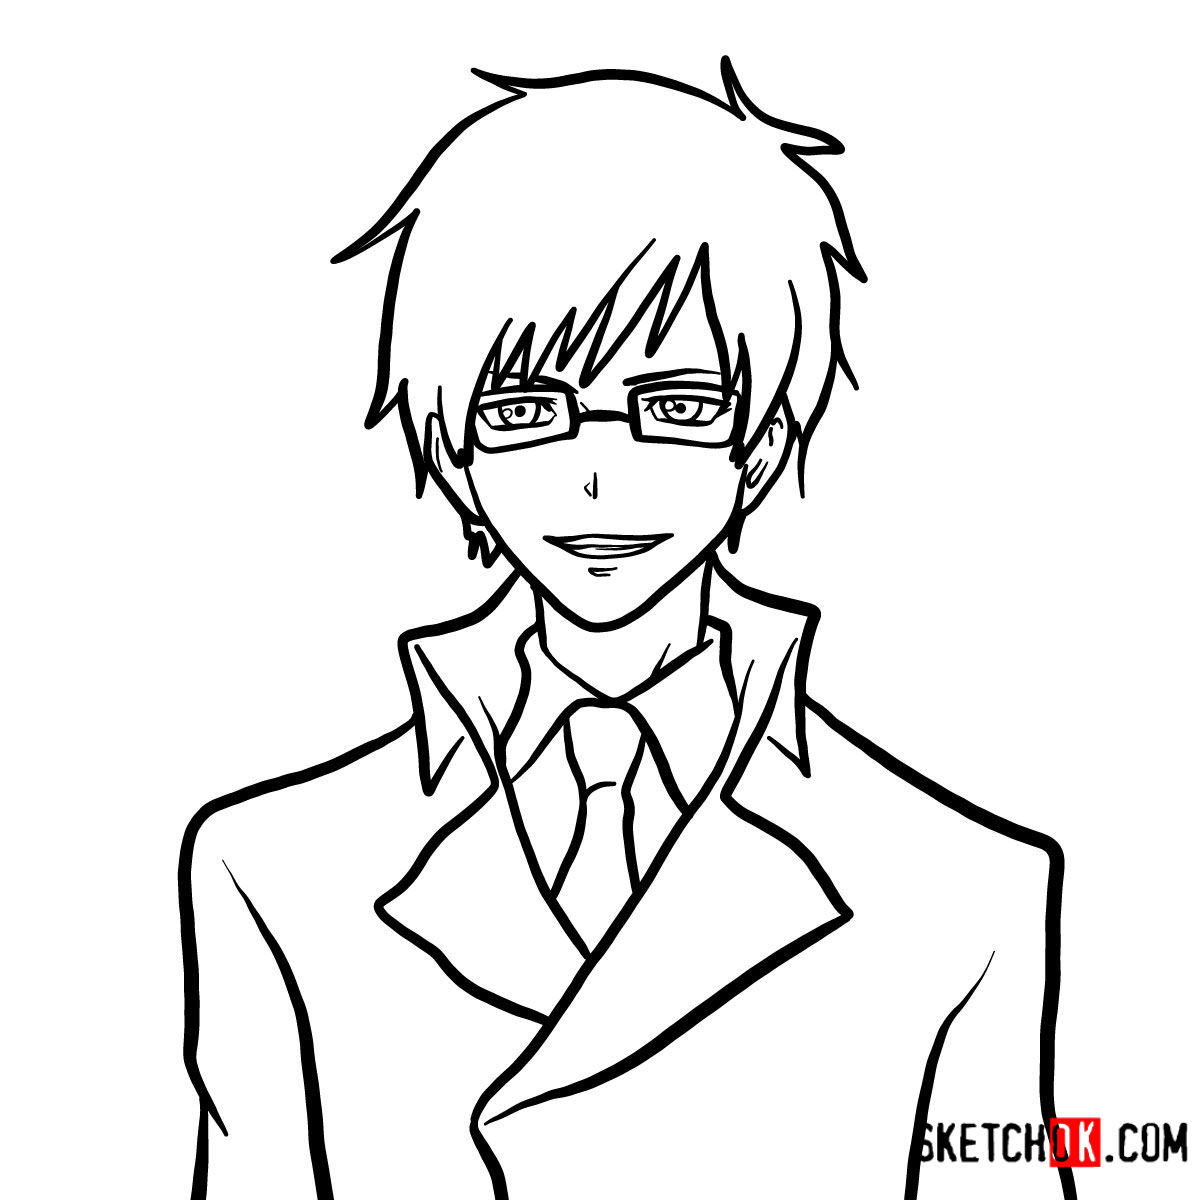 Blue Exorcist Archives - Sketchok easy drawing guides